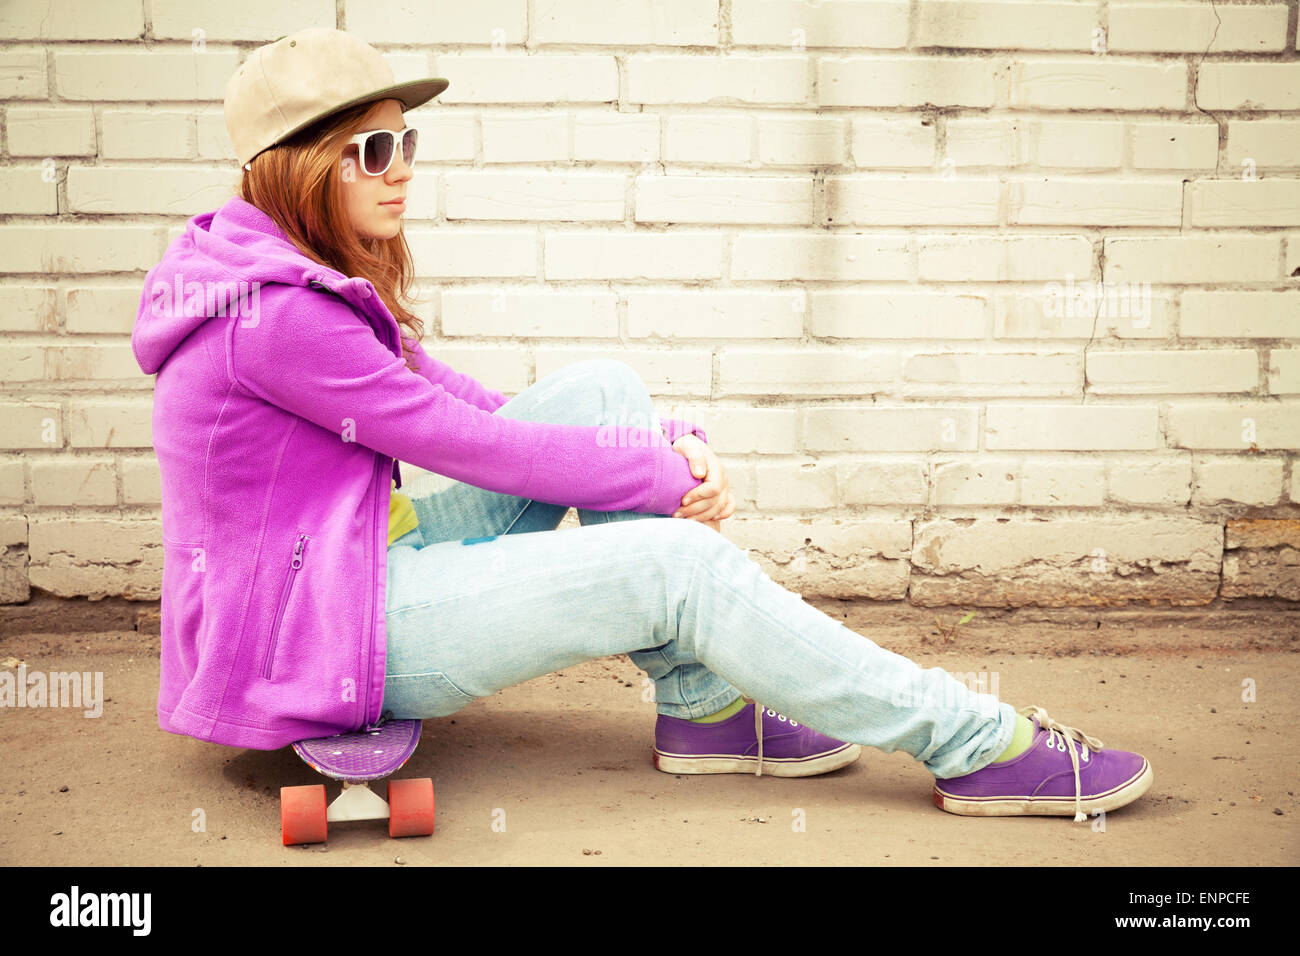 Blond teenage girl in jeans, cap and sunglasses sits on her skateboard near urban brick wall Stock Photo